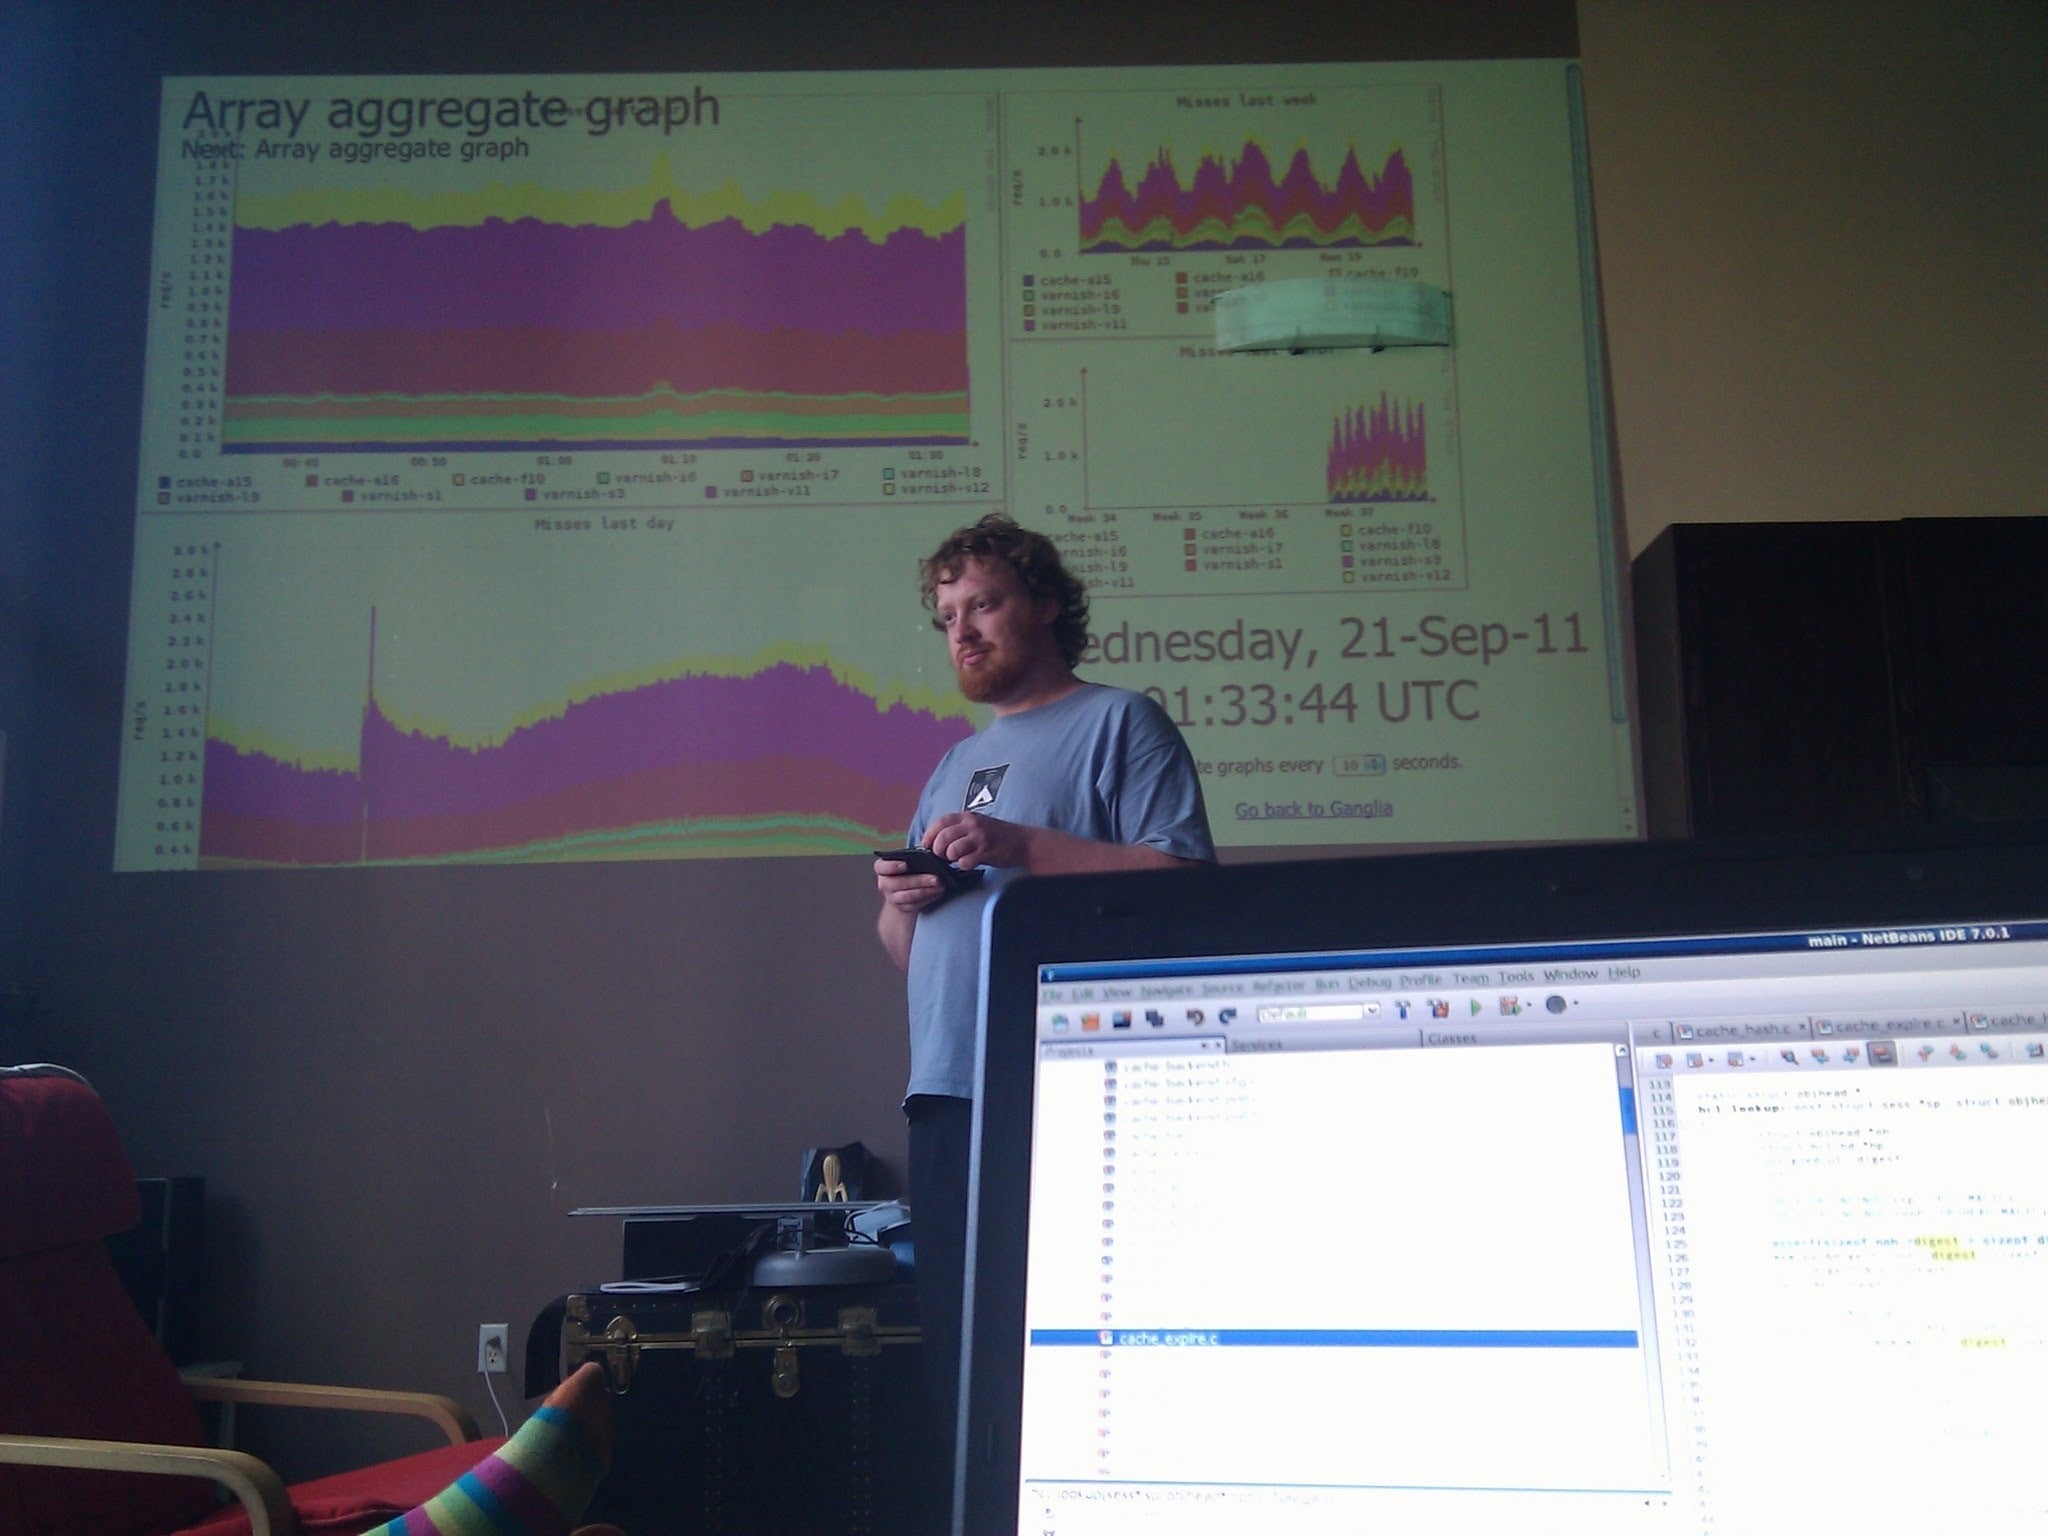 Artur runs a Fastly meeting from his living room in 2011. 